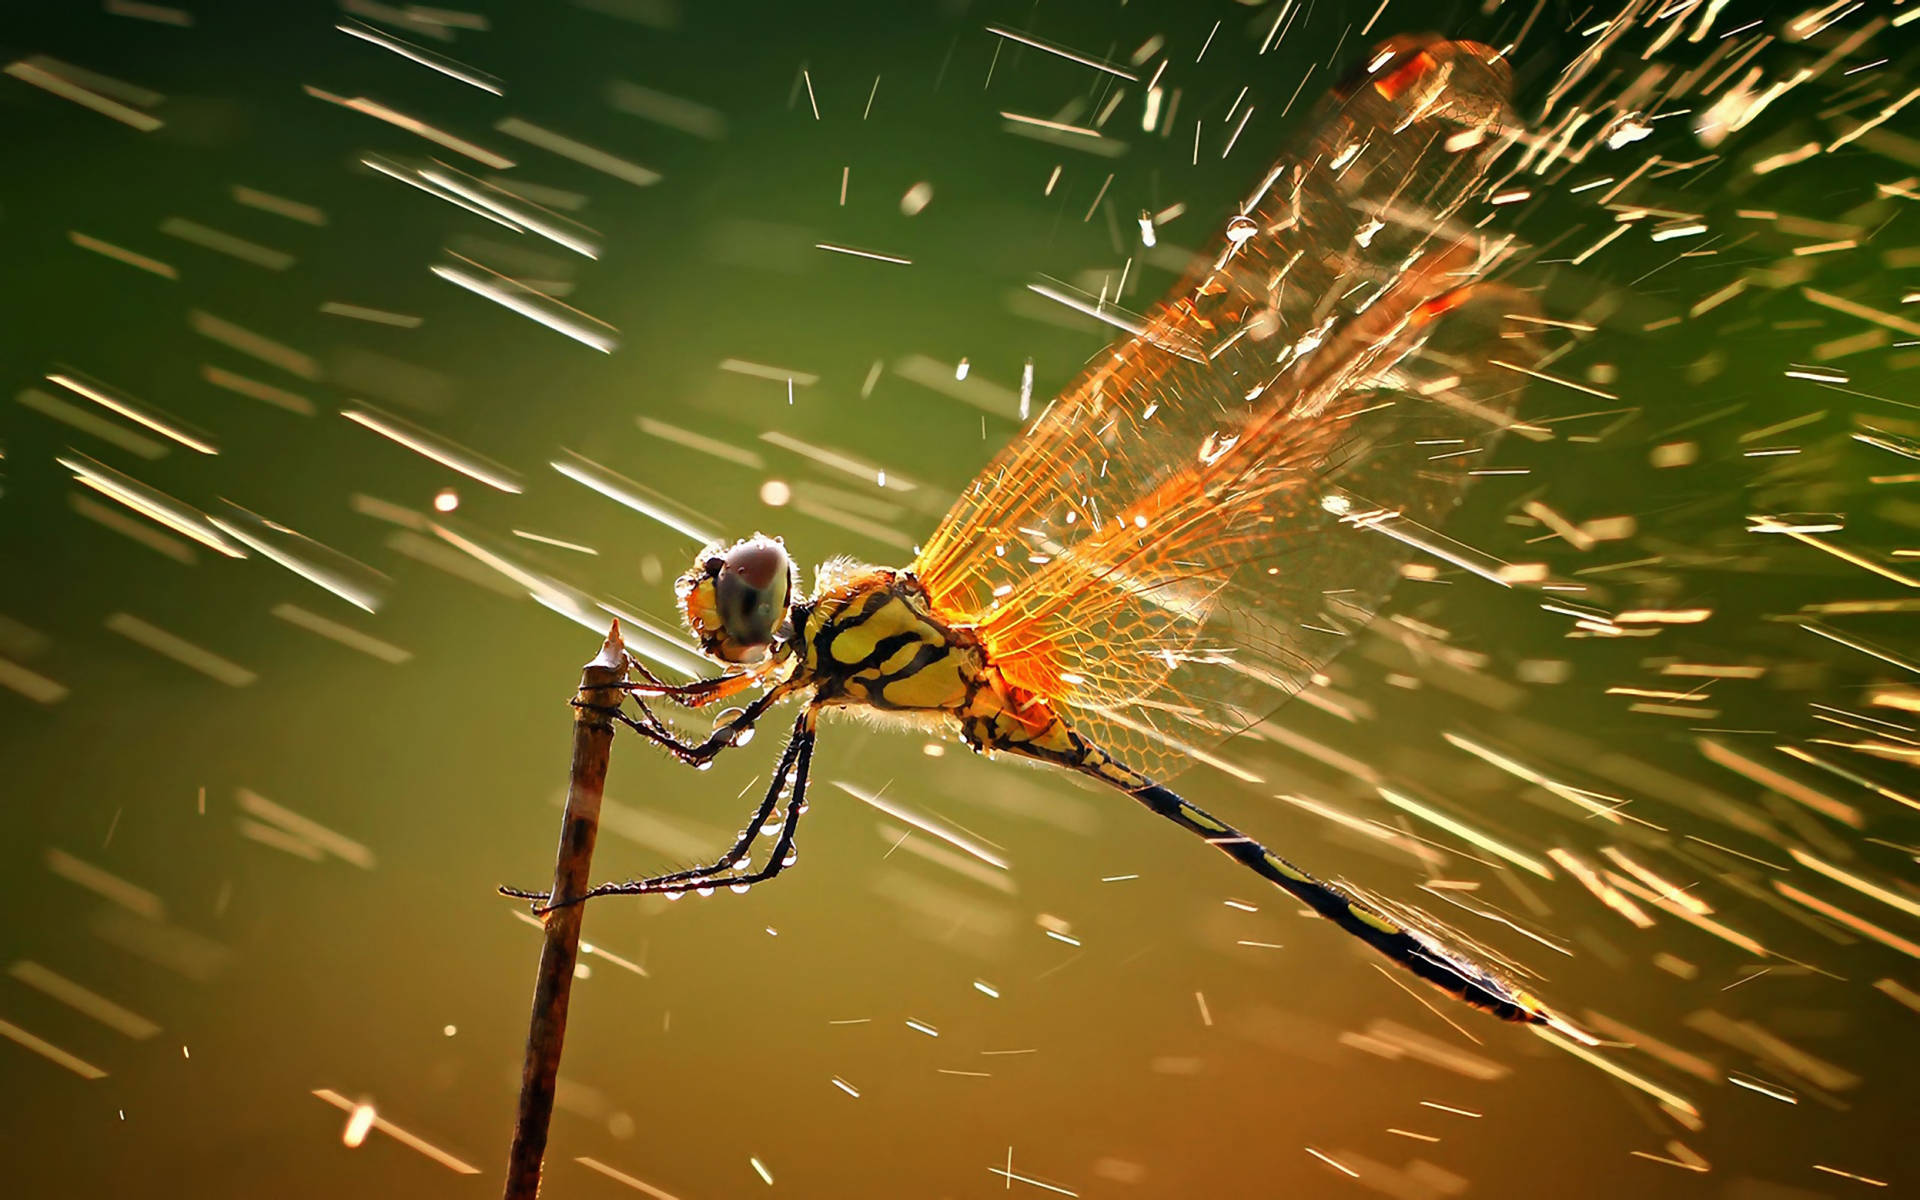 Insect Dragonfly With Splashing Water